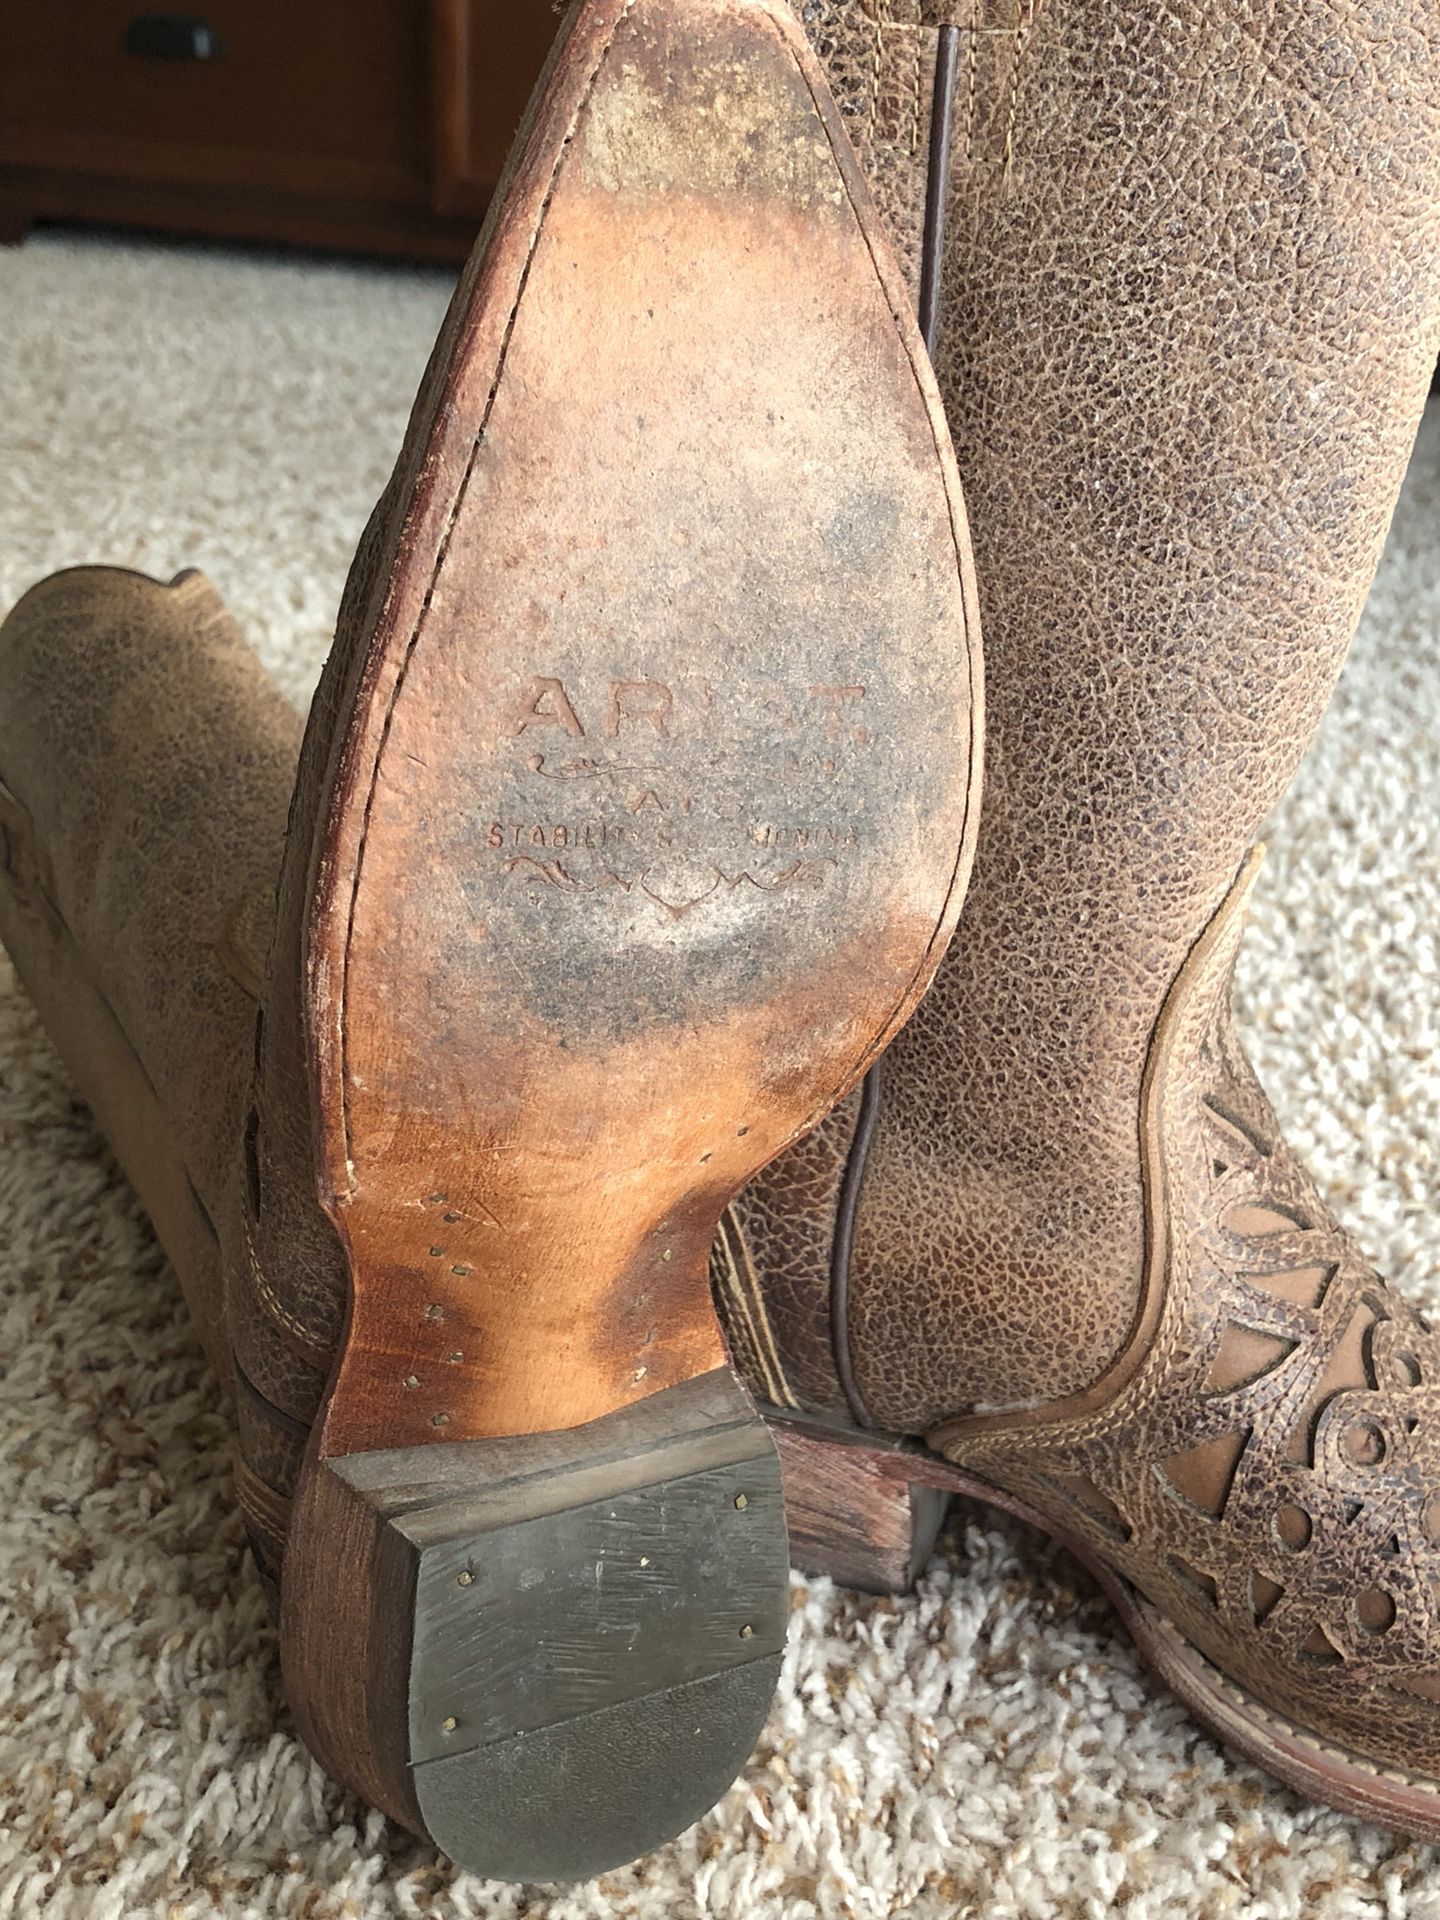 ARIAT BOOTS, FROM BOOT BARN for Sale in Temecula, CA - OfferUp